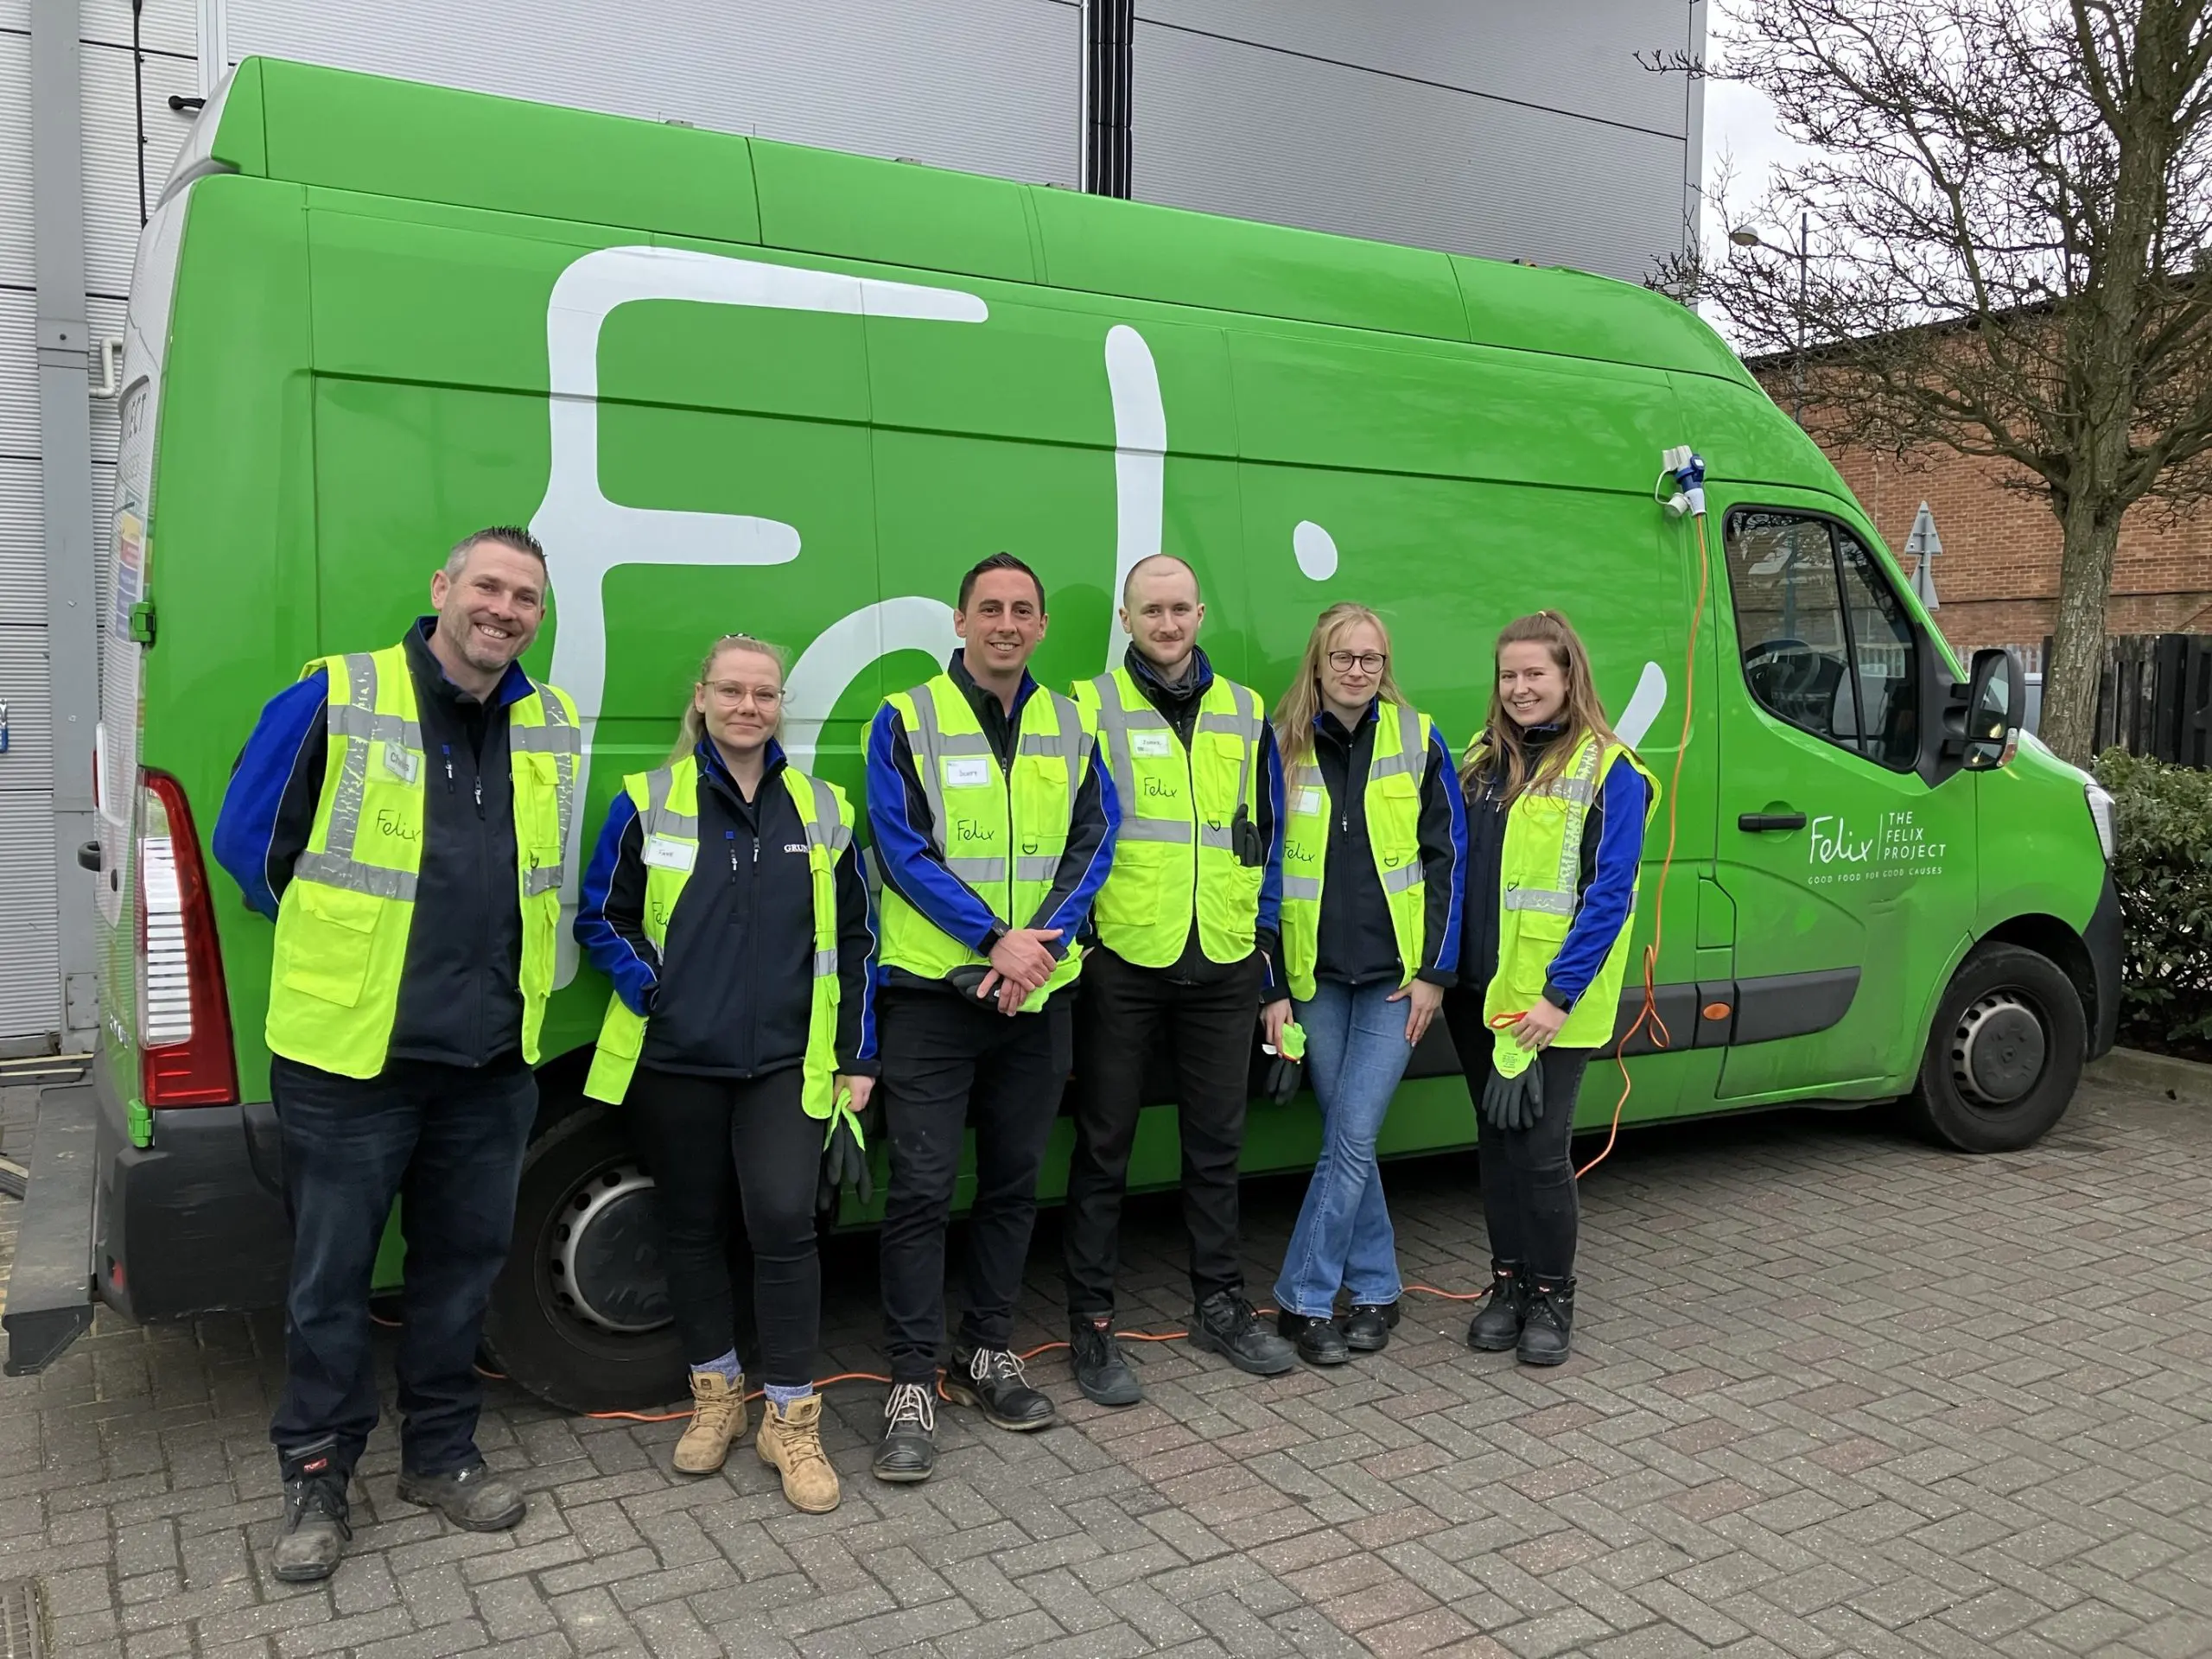 Ready for a day’s volunteering at The Felix Project’s Enfield depot: (l-r) Chris Tomkins, Senior Contract Manager, Faye Higgs, Contract Manager, Scott Williams, Head of Contract Management, James Douglas, Contract Engagement Assistant, Bethan Thomas, Junior Graphic Designer, Annie Sessions, Marketing Manager 